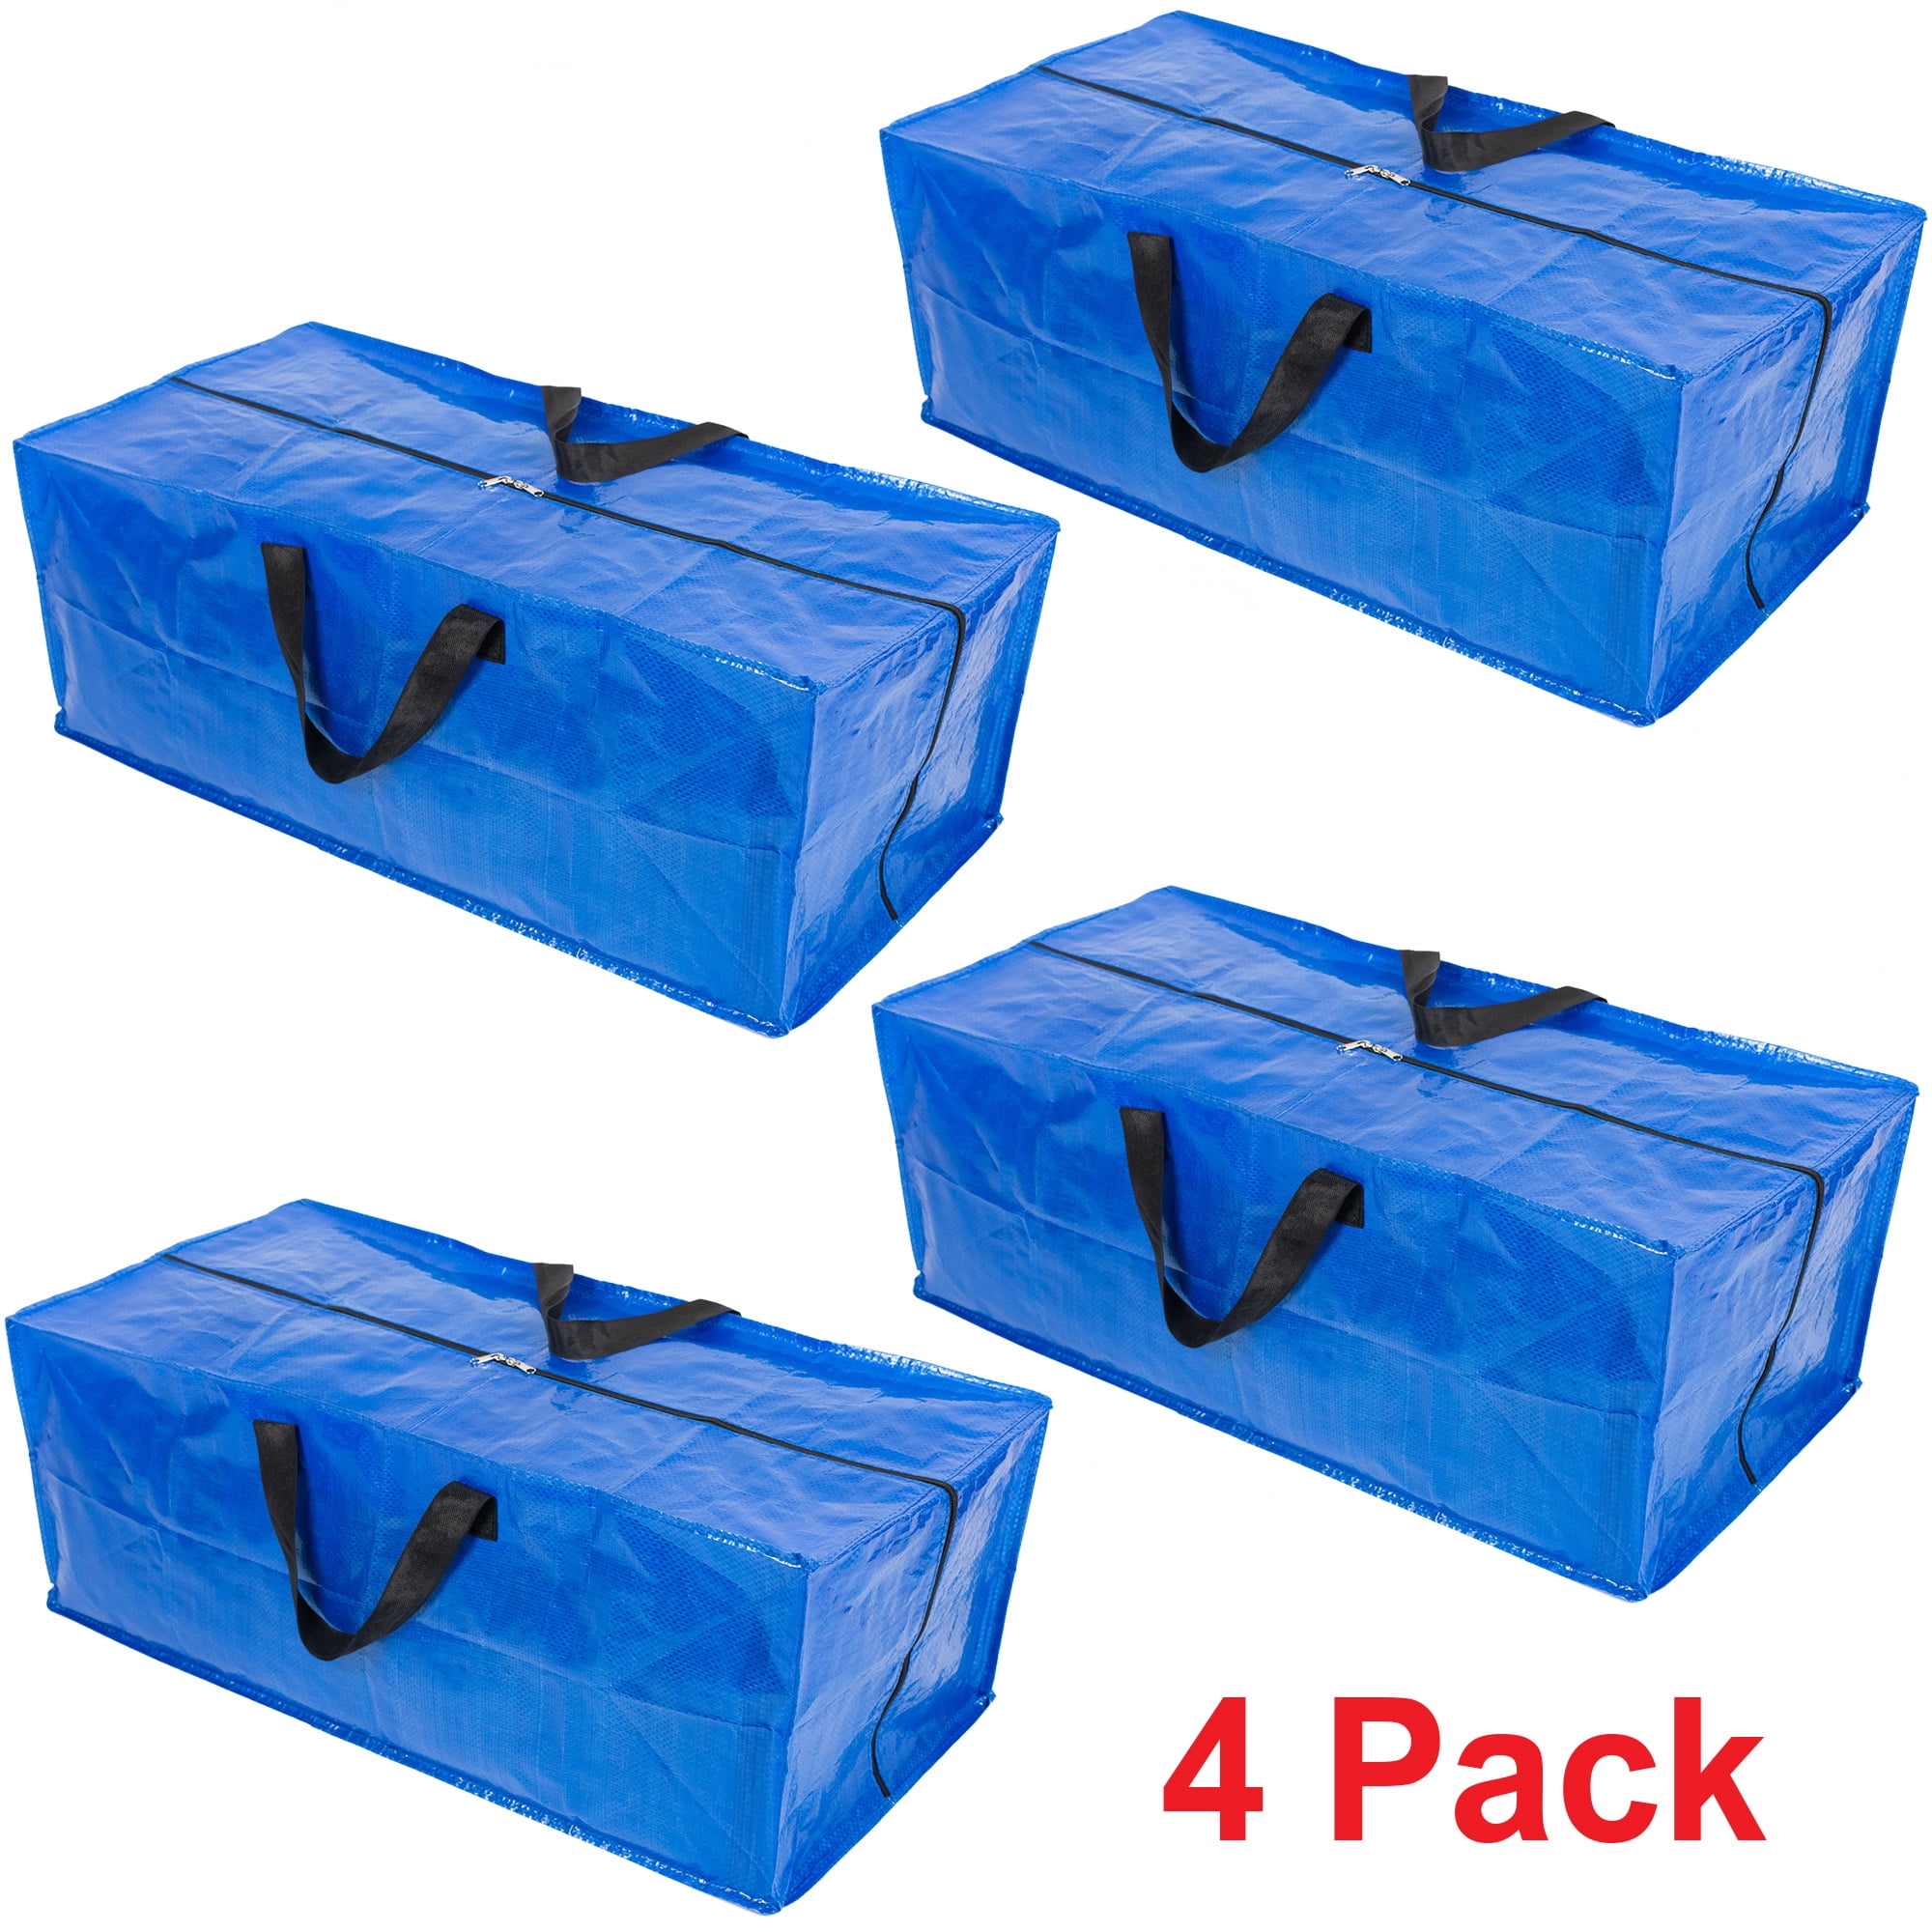  Packing Bags for Moving – 6 Pack Clear Zippered